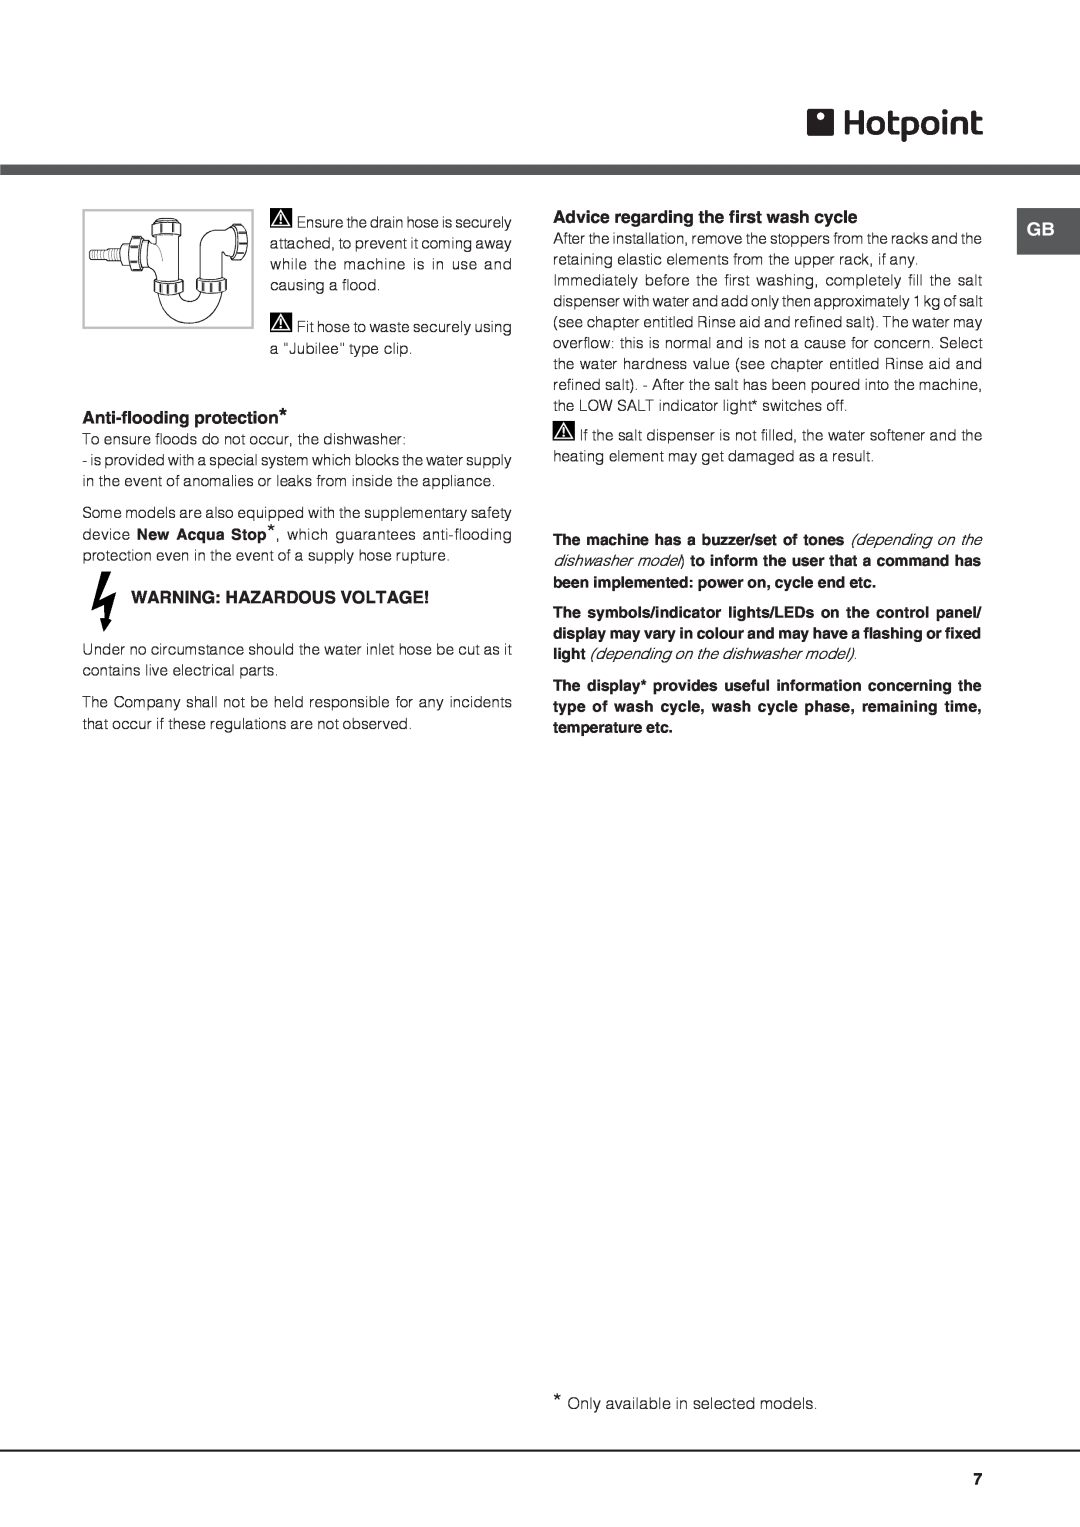 Hotpoint FDLET 31120 manual Anti-flooding protection, Warning Hazardous Voltage, Advice regarding the first wash cycle 